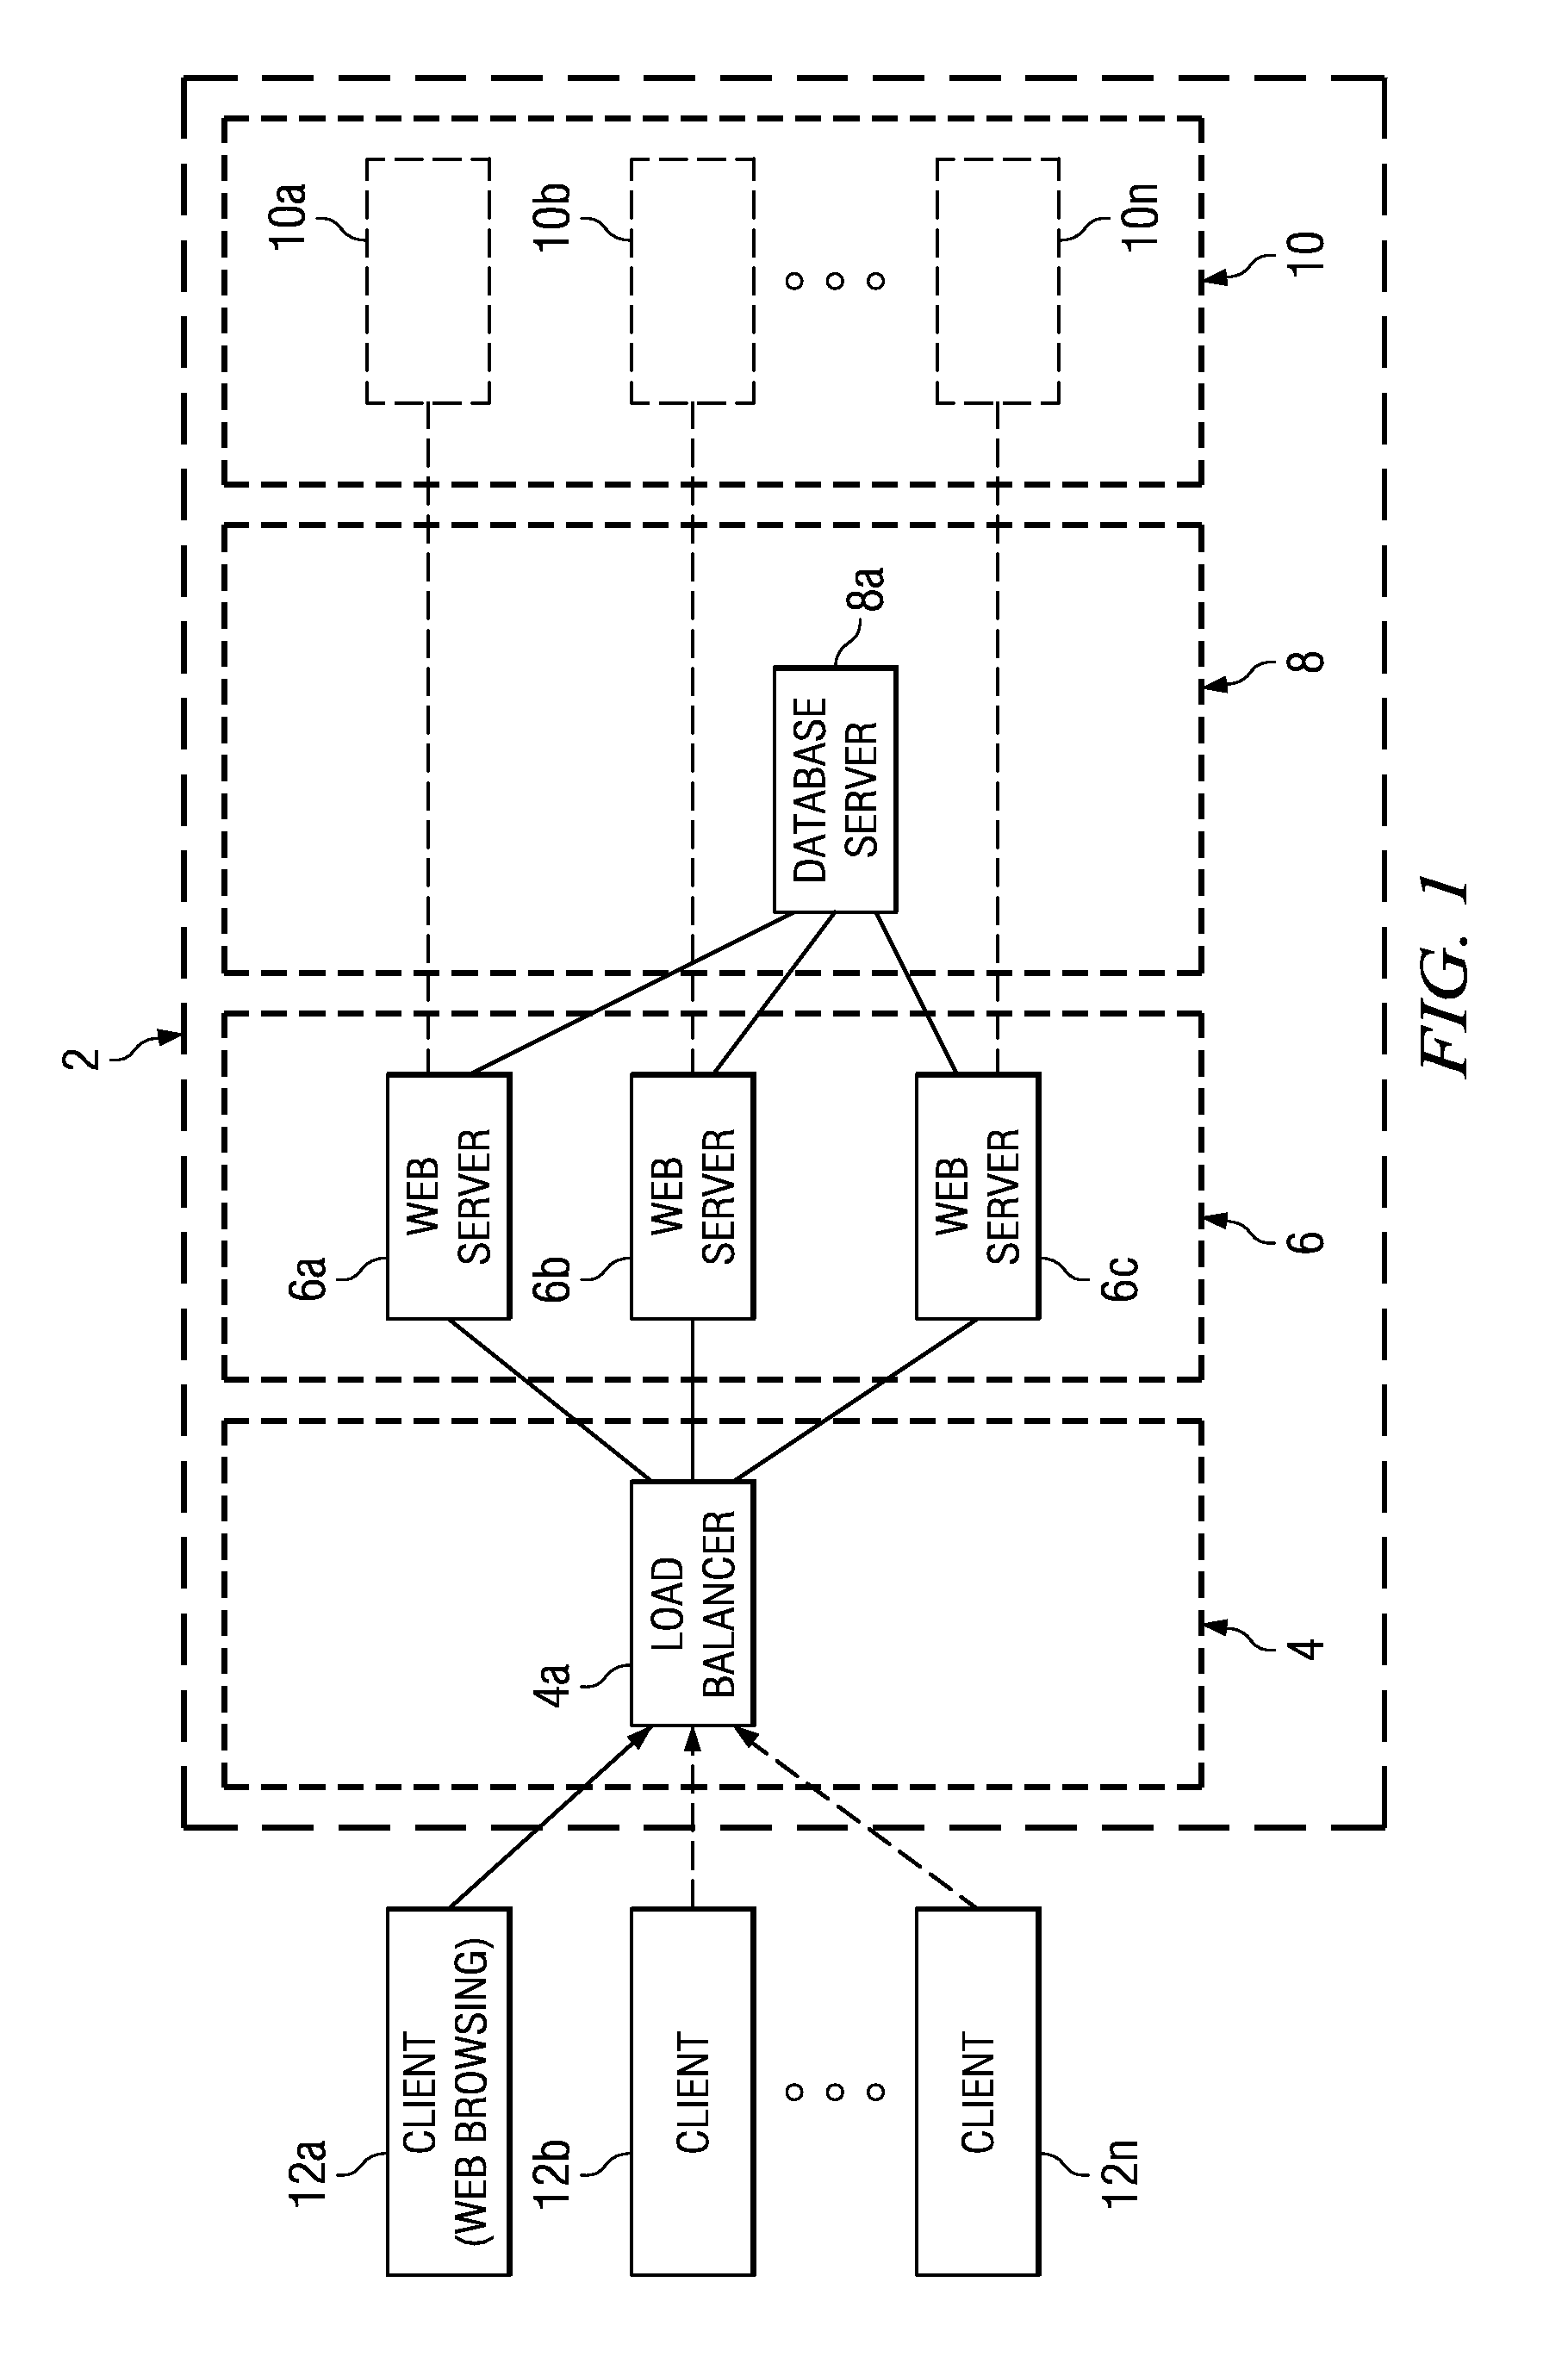 Method and system for modeling and analyzing computing resource requirements of software applications in a shared and distributed computing environment